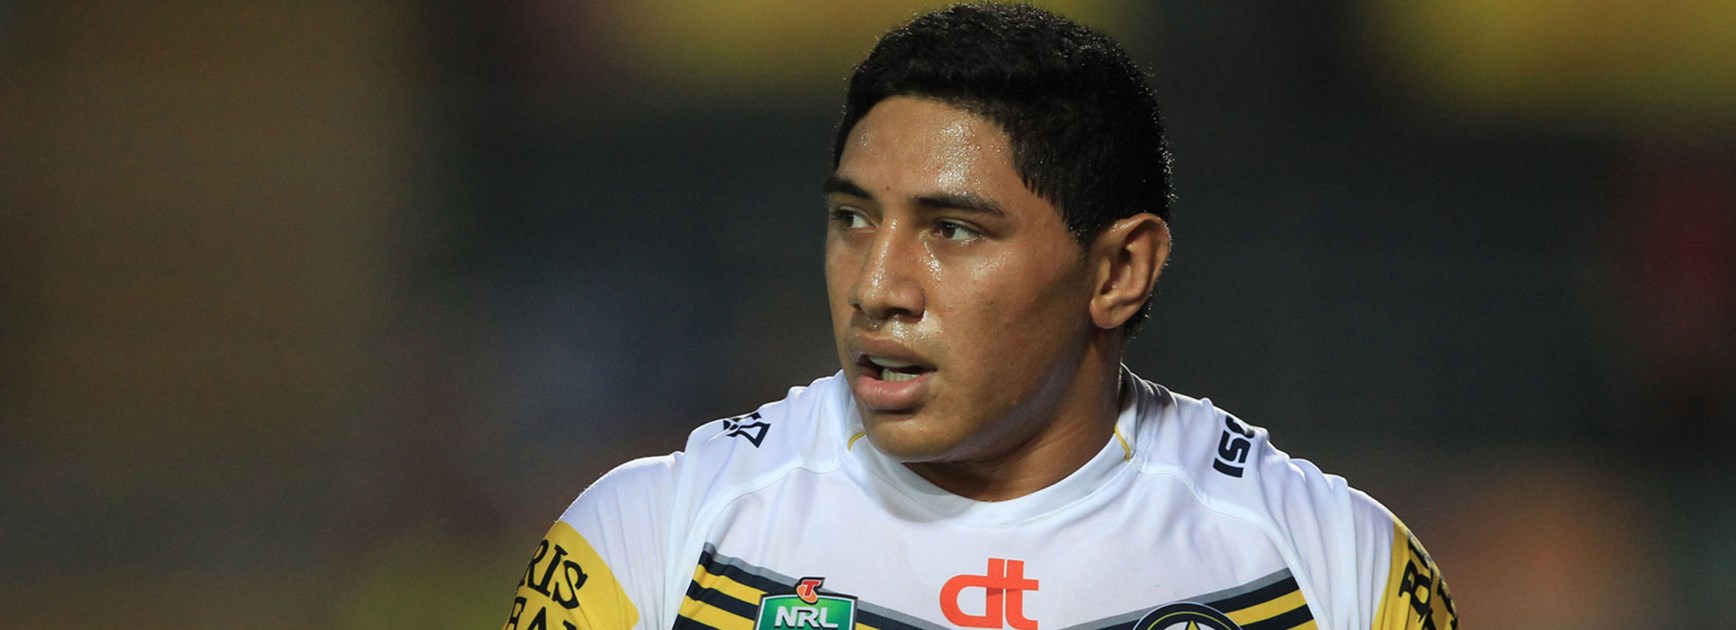 Cowboys forward Jason Taumalolo returned to his devastating best against the Storm in Round 4.